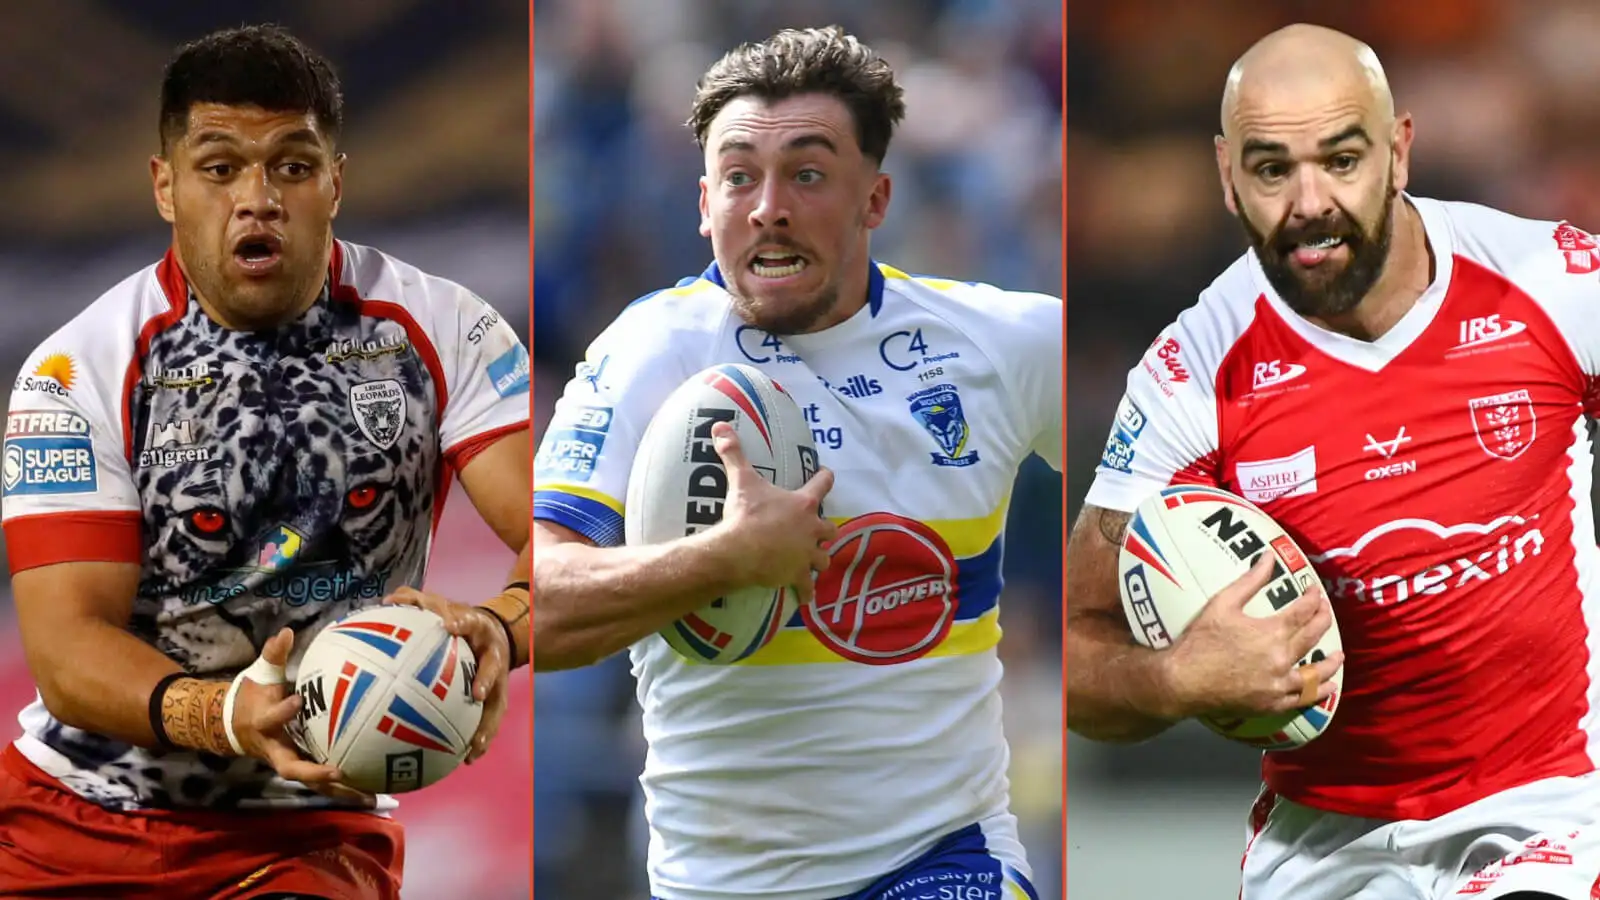 Casualty Ward: Leigh dealt major double blow, Matty Ashton absence explained & Willie Peters provides triple injury update